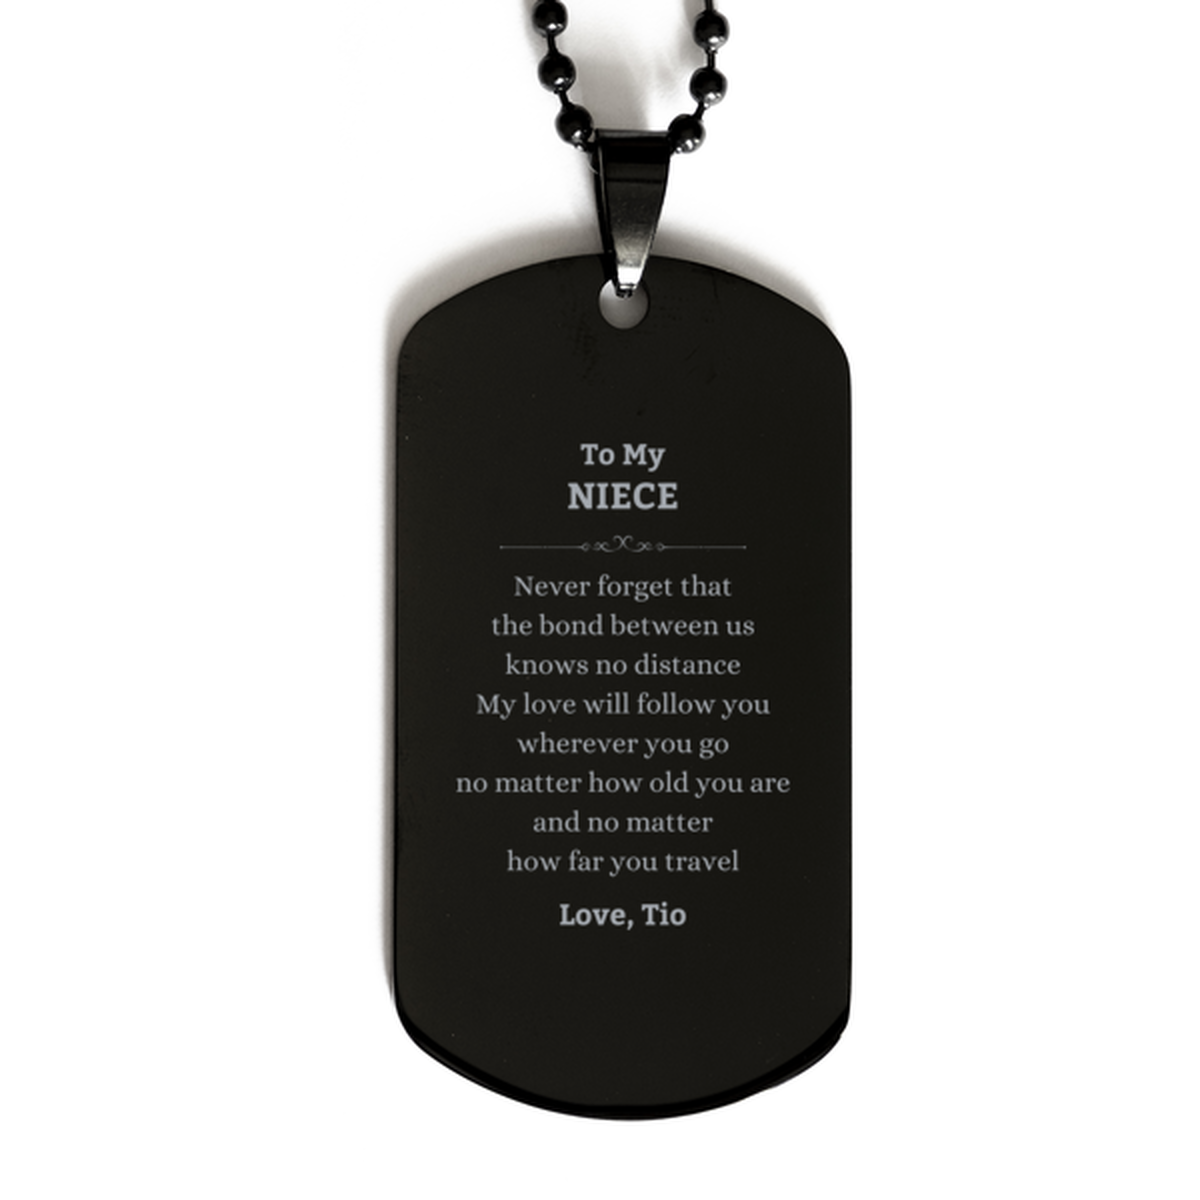 Niece Birthday Gifts from Tio, Adjustable Black Dog Tag for Niece Christmas Graduation Unique Gifts Niece Never forget that the bond between us knows no distance. Love, Tio